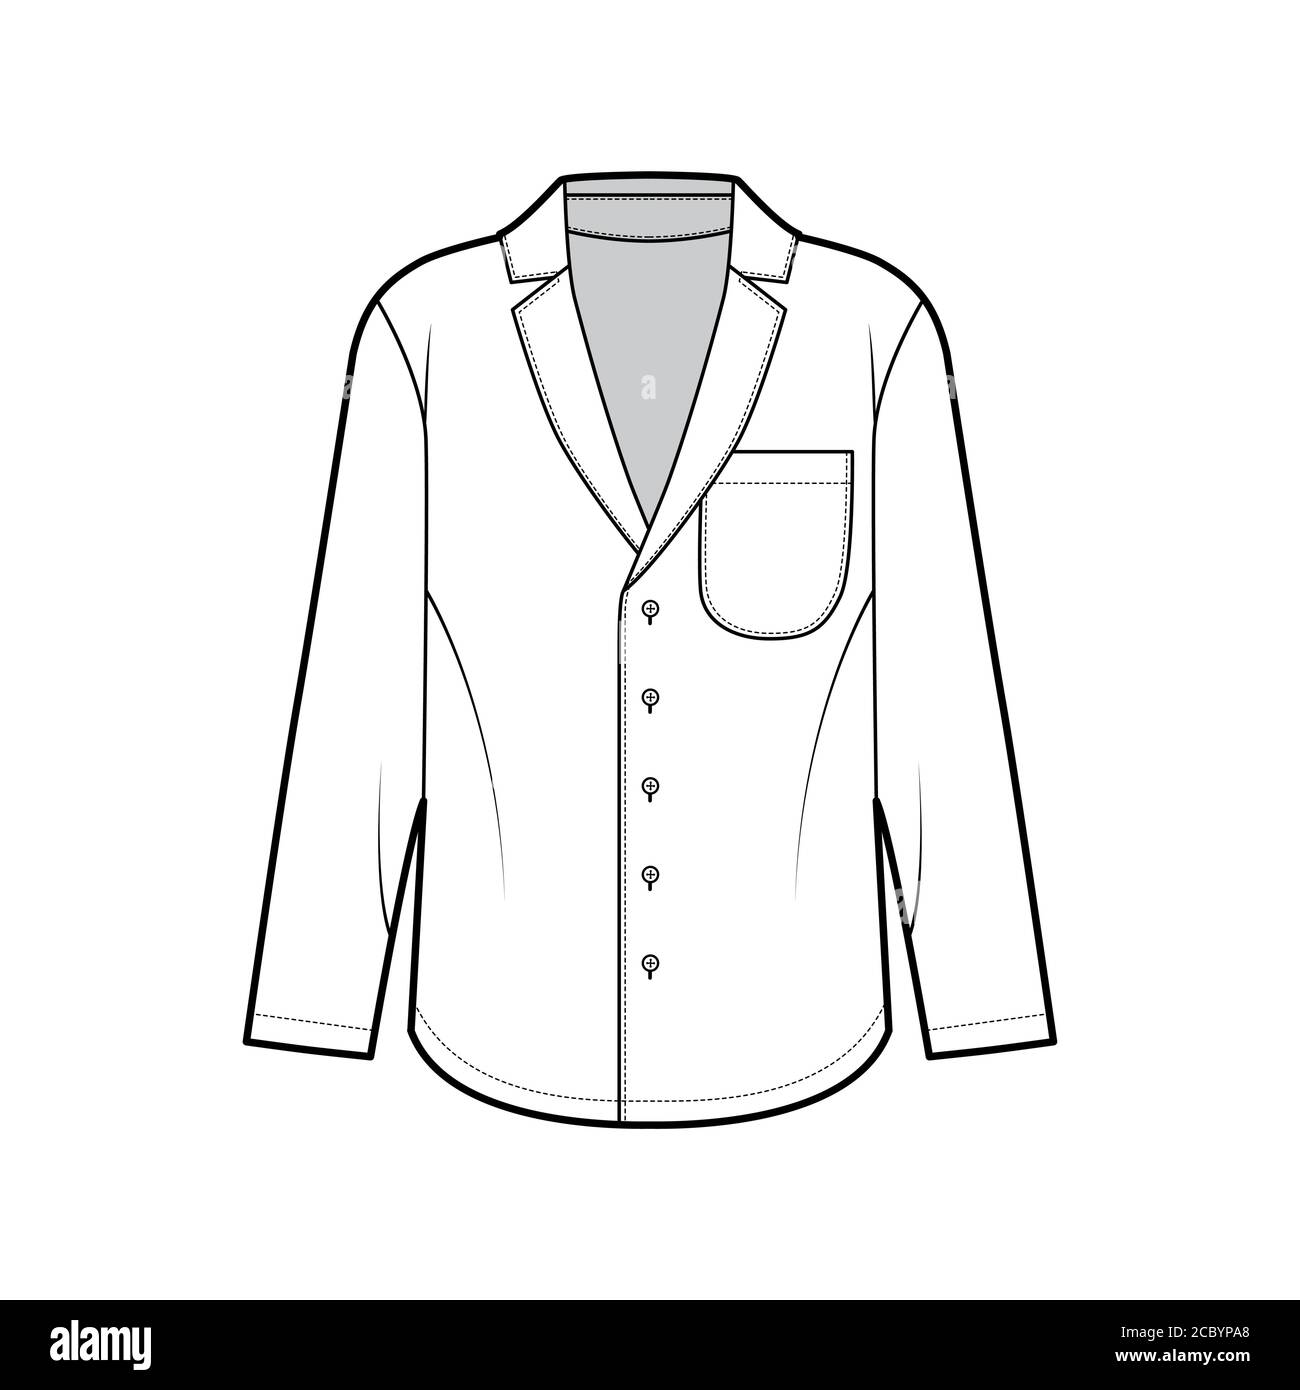 Shirt technical fashion illustration with loose silhouette, pointed notch collar, front button fastenings, rounded pocket, long sleeves. Flat apparel template front white color. Women men unisex top Stock Vector